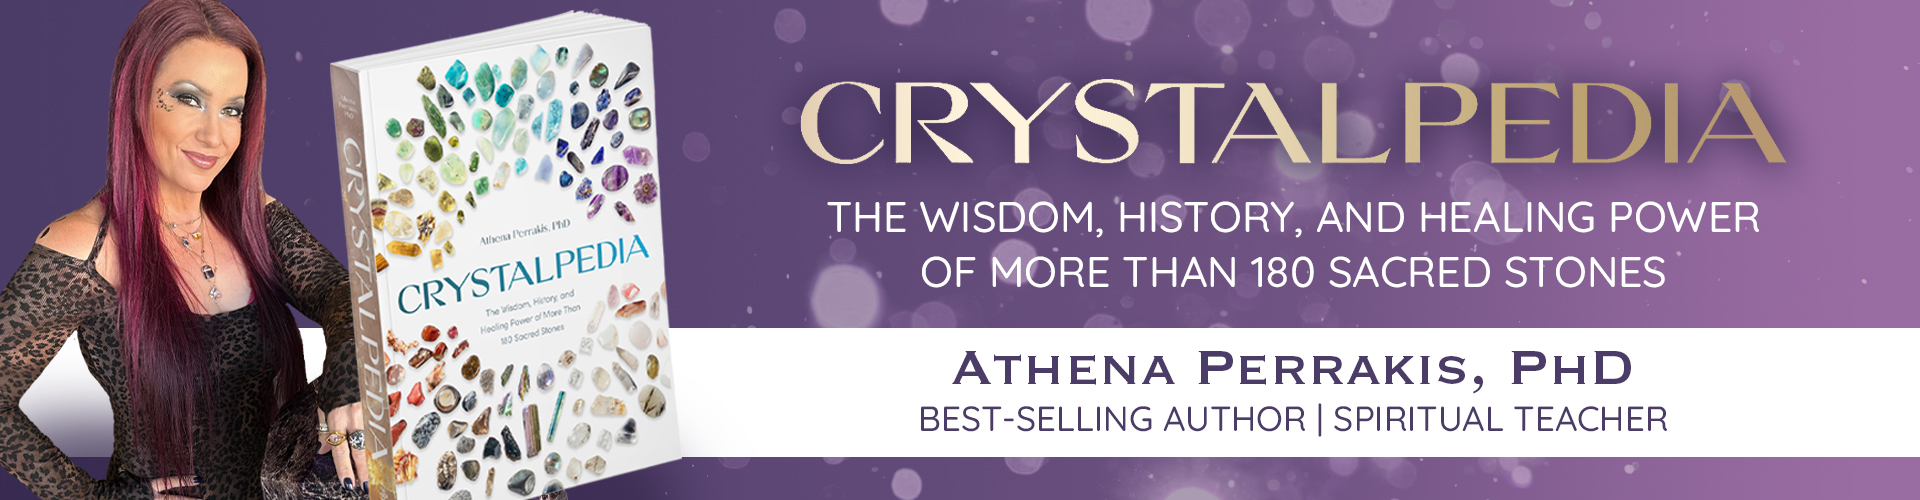 Preorder Crystalpedia - The Wisdom, history and healing power of more than 180 sacred stones